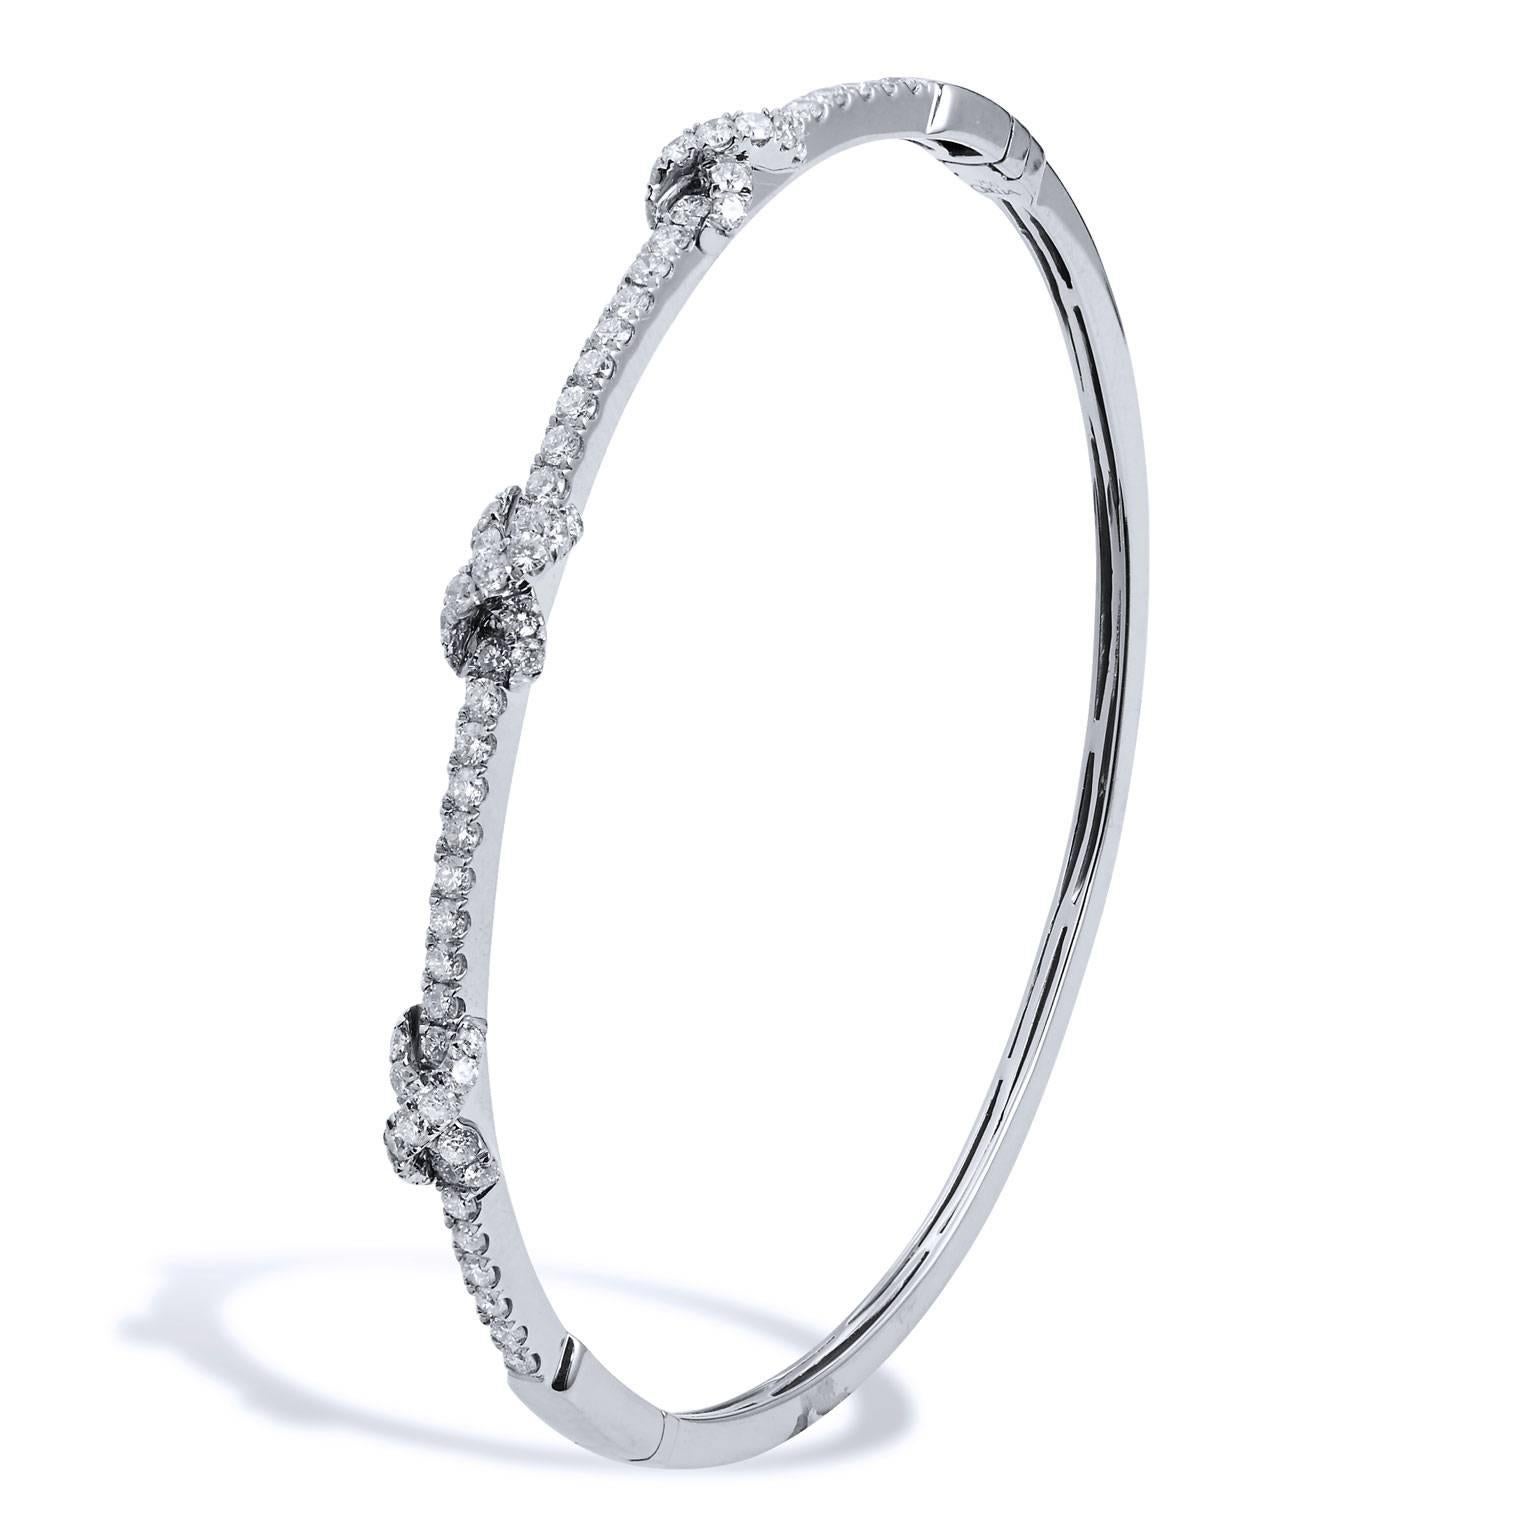 This oval bangle is fashioned in 18 karat white gold and features 1.26 carat of  pave-set diamonds which embellish three knot-shapes (G/H/VS).